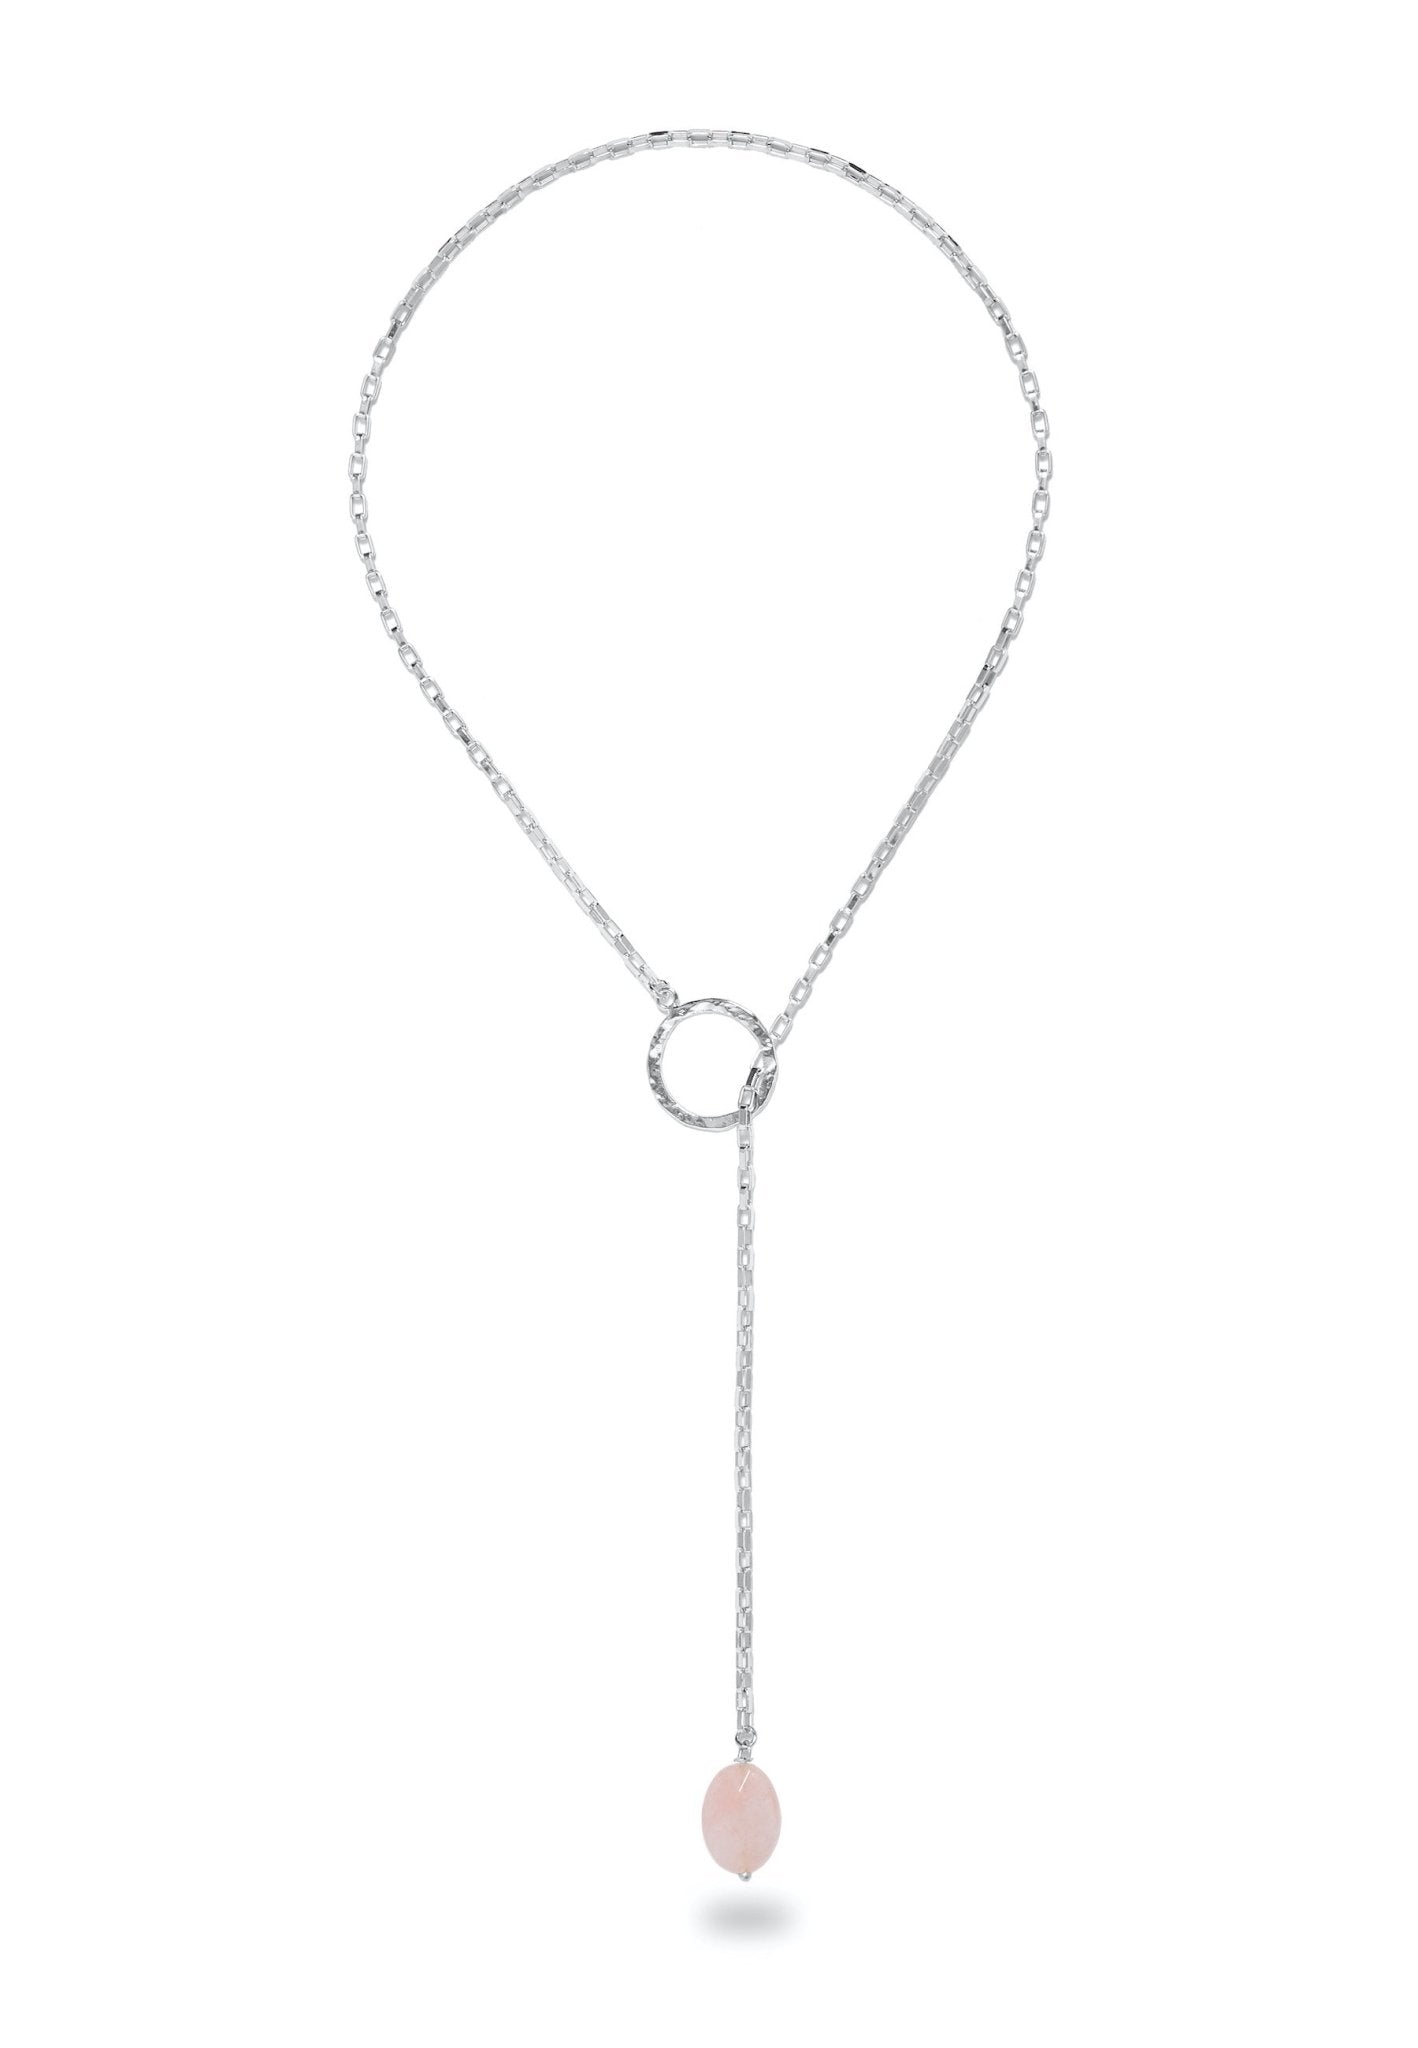 18Kt White Gold Fope Lariat Aria Necklace